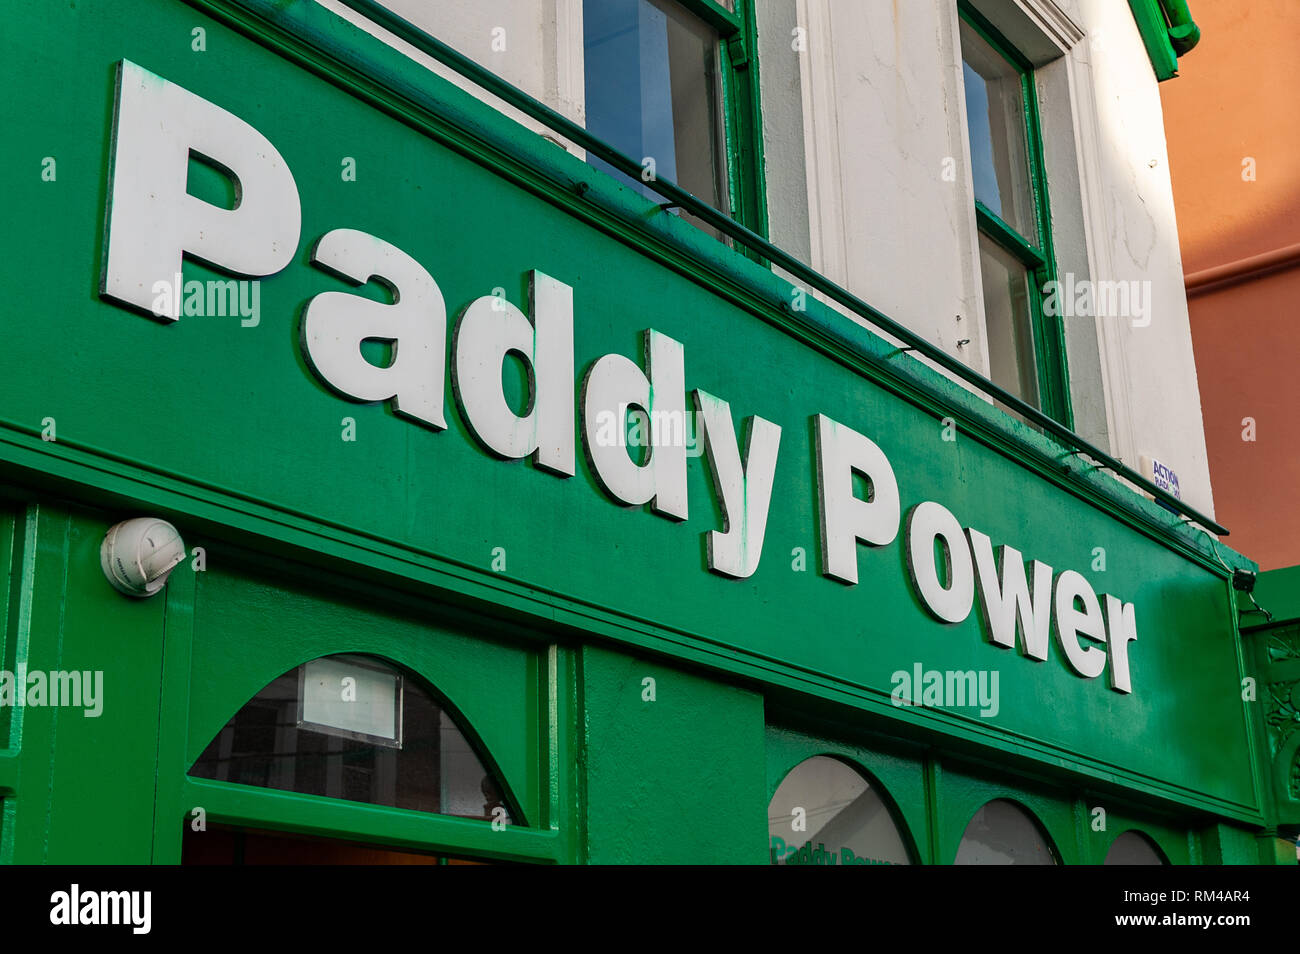 Paddy Power bookmakers/betting shop front sign Stock Photo